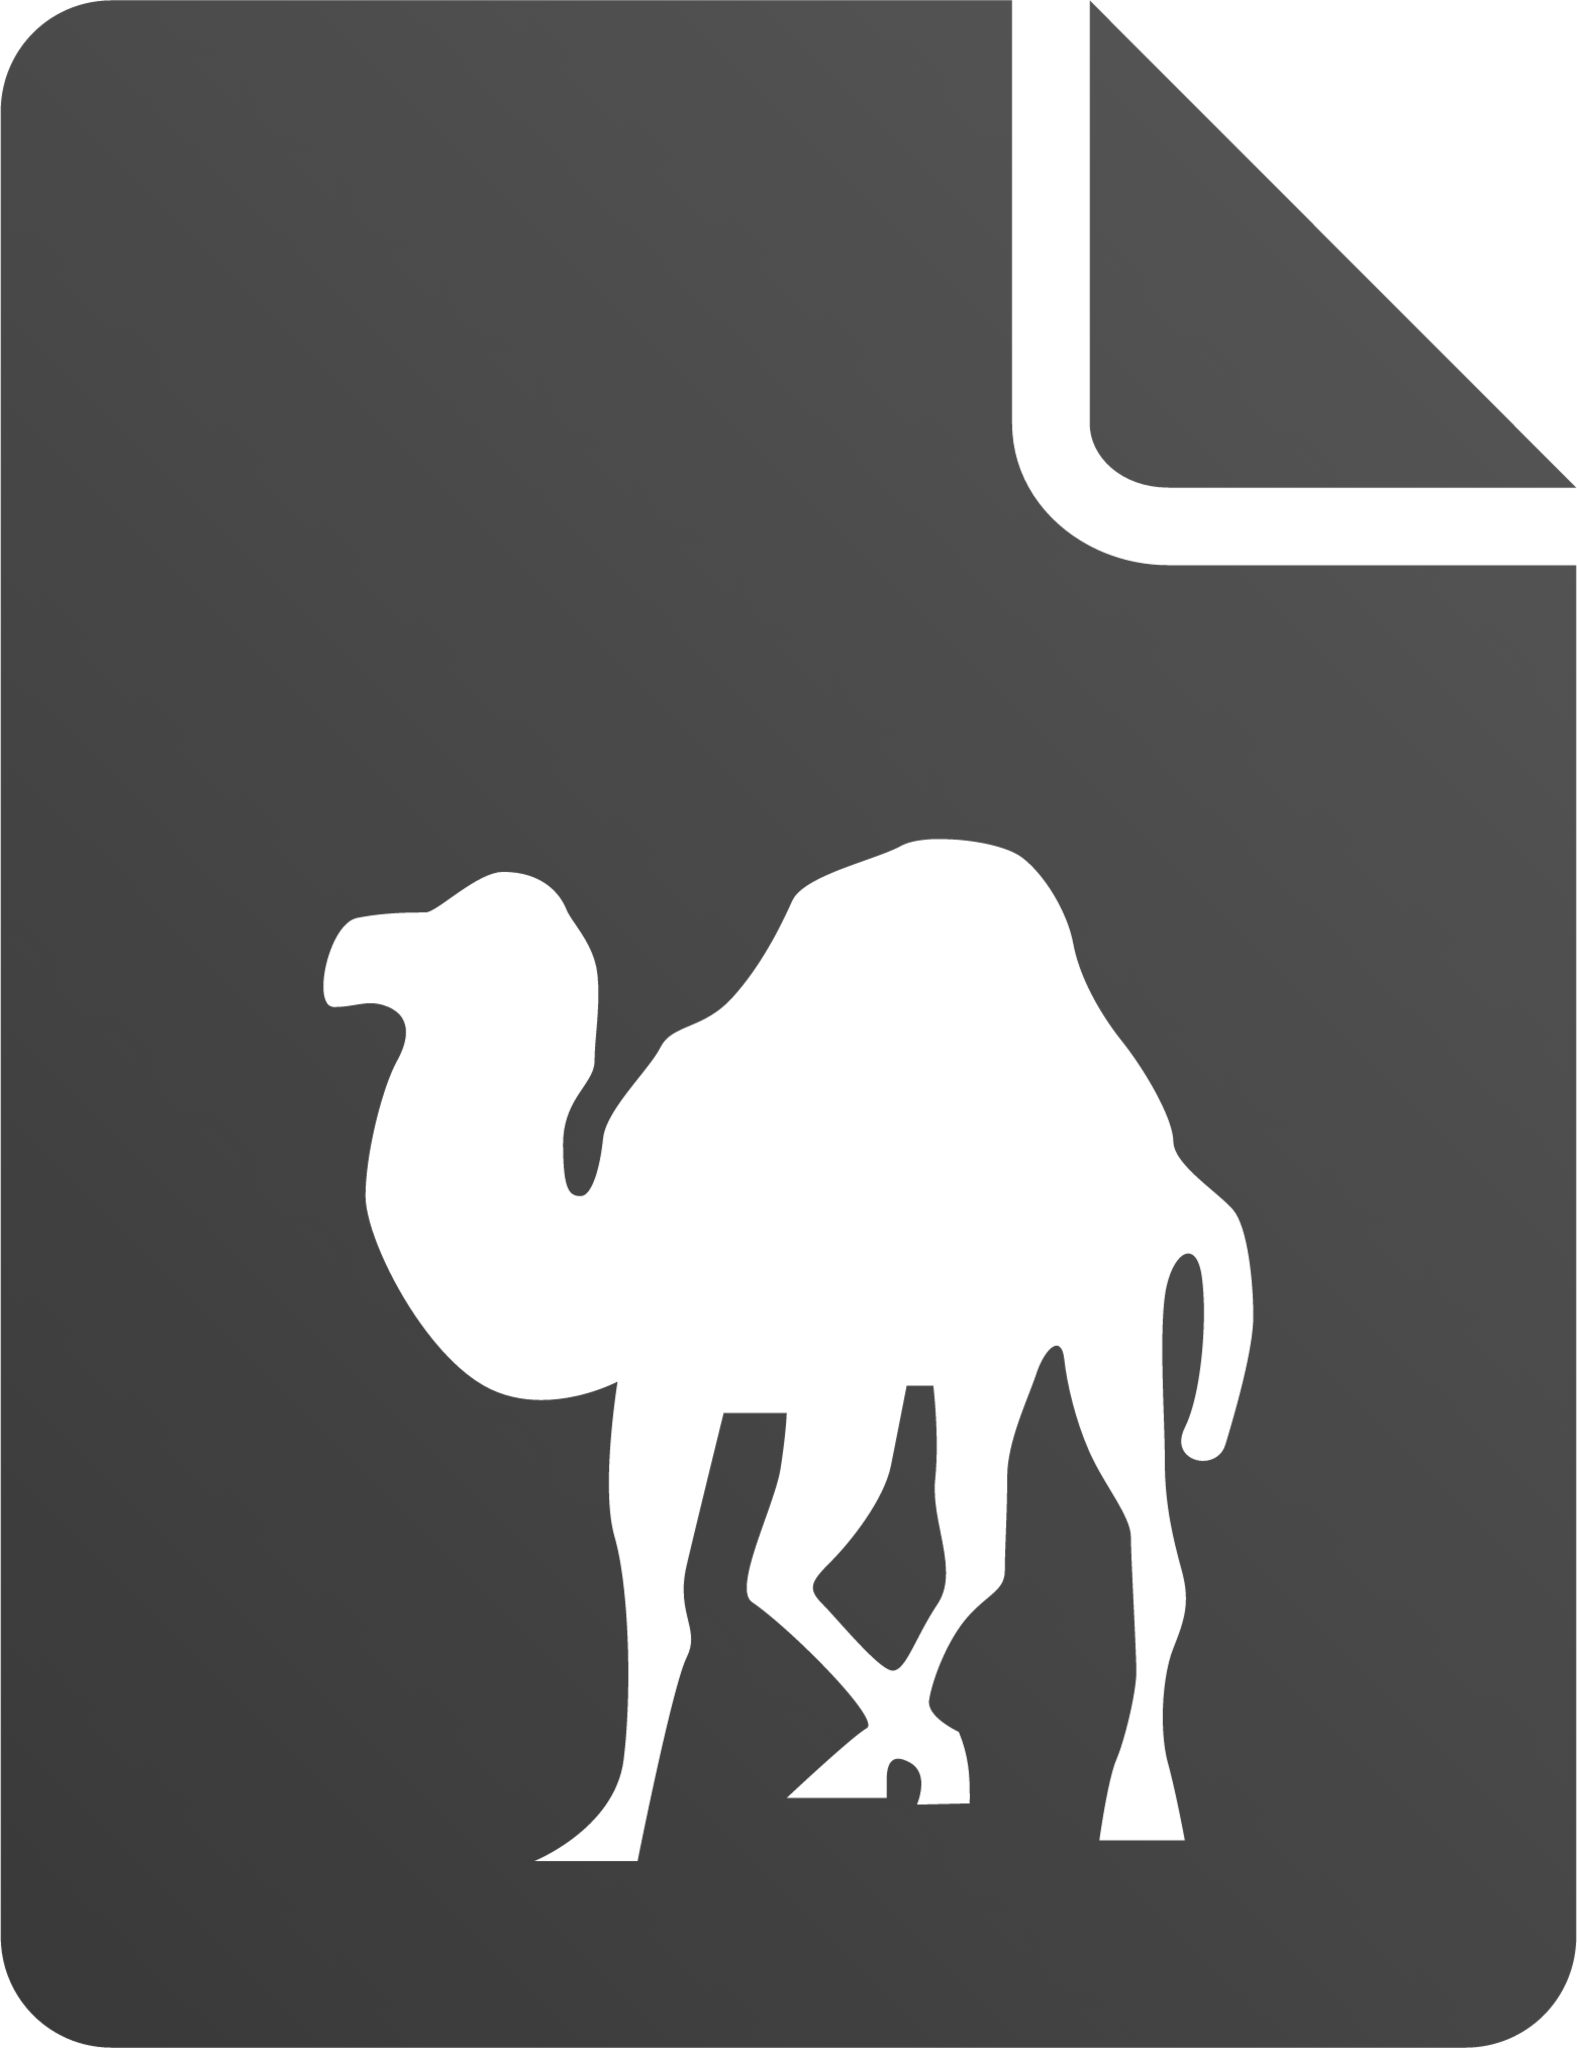 text x perl icon